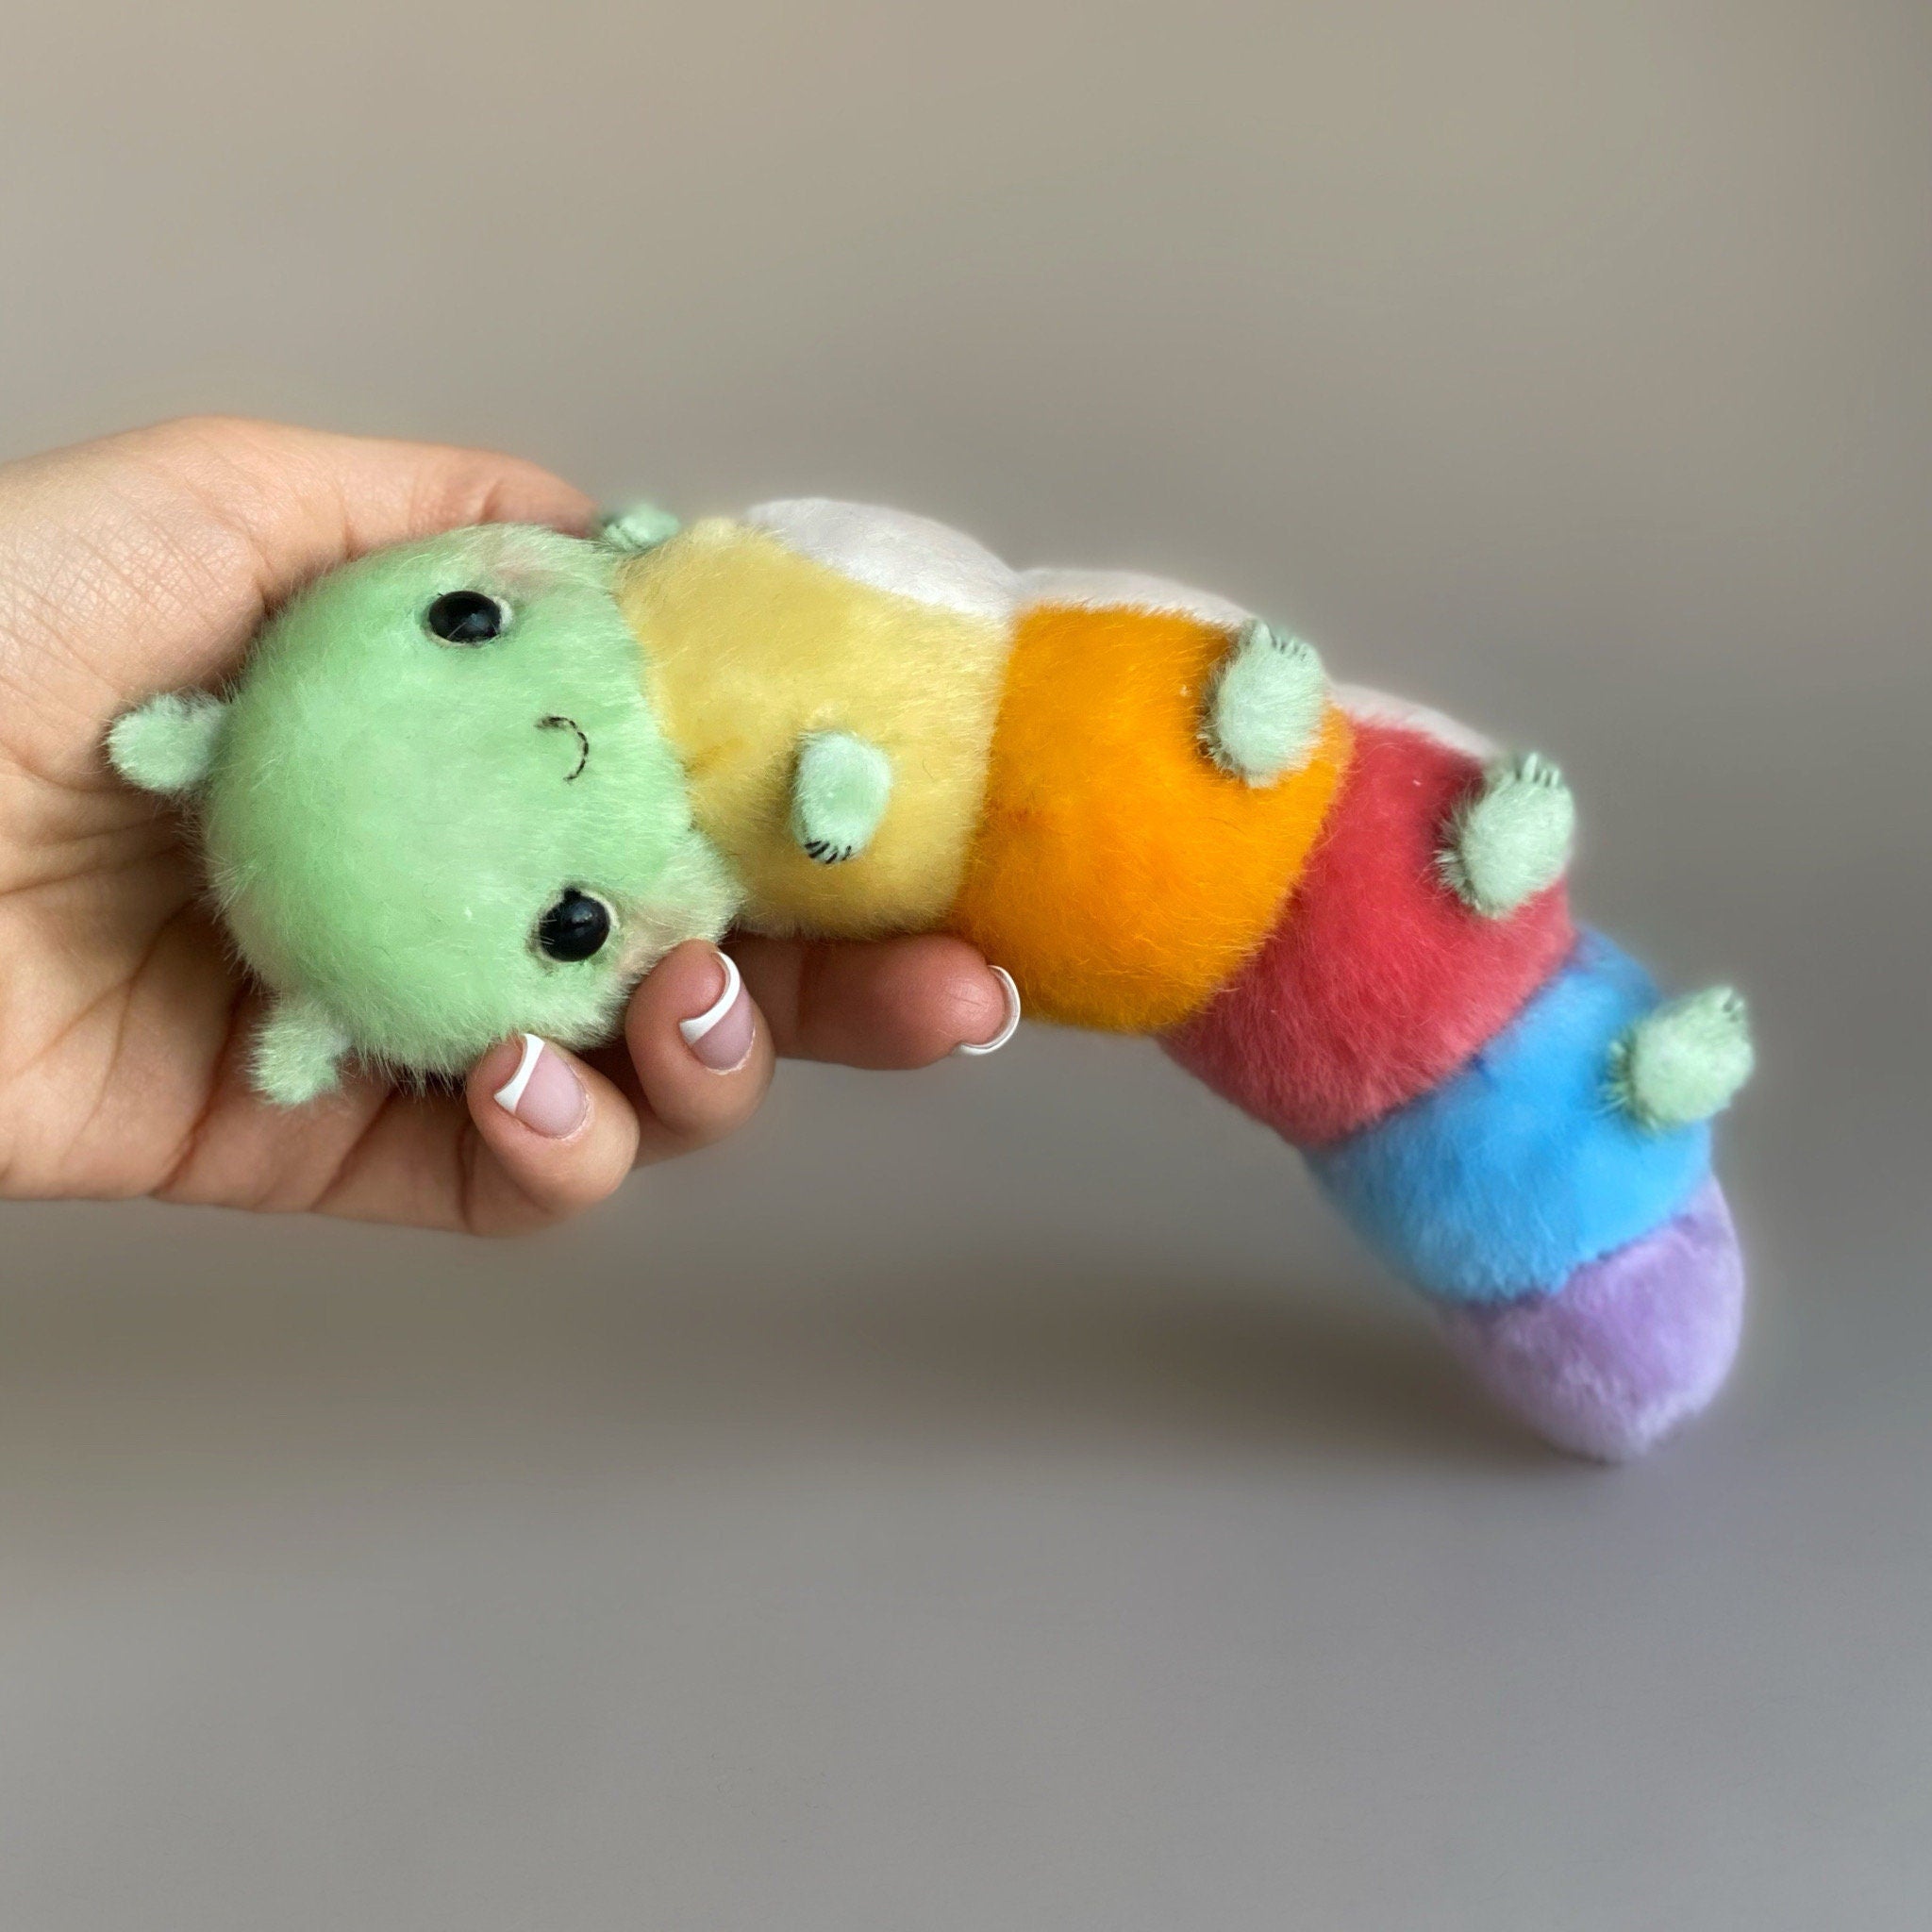 Caterpillar PDF sewing pattern Video tutorial DIY stuffed toy pattern kids toy pattern easy to sew gift for creative friend